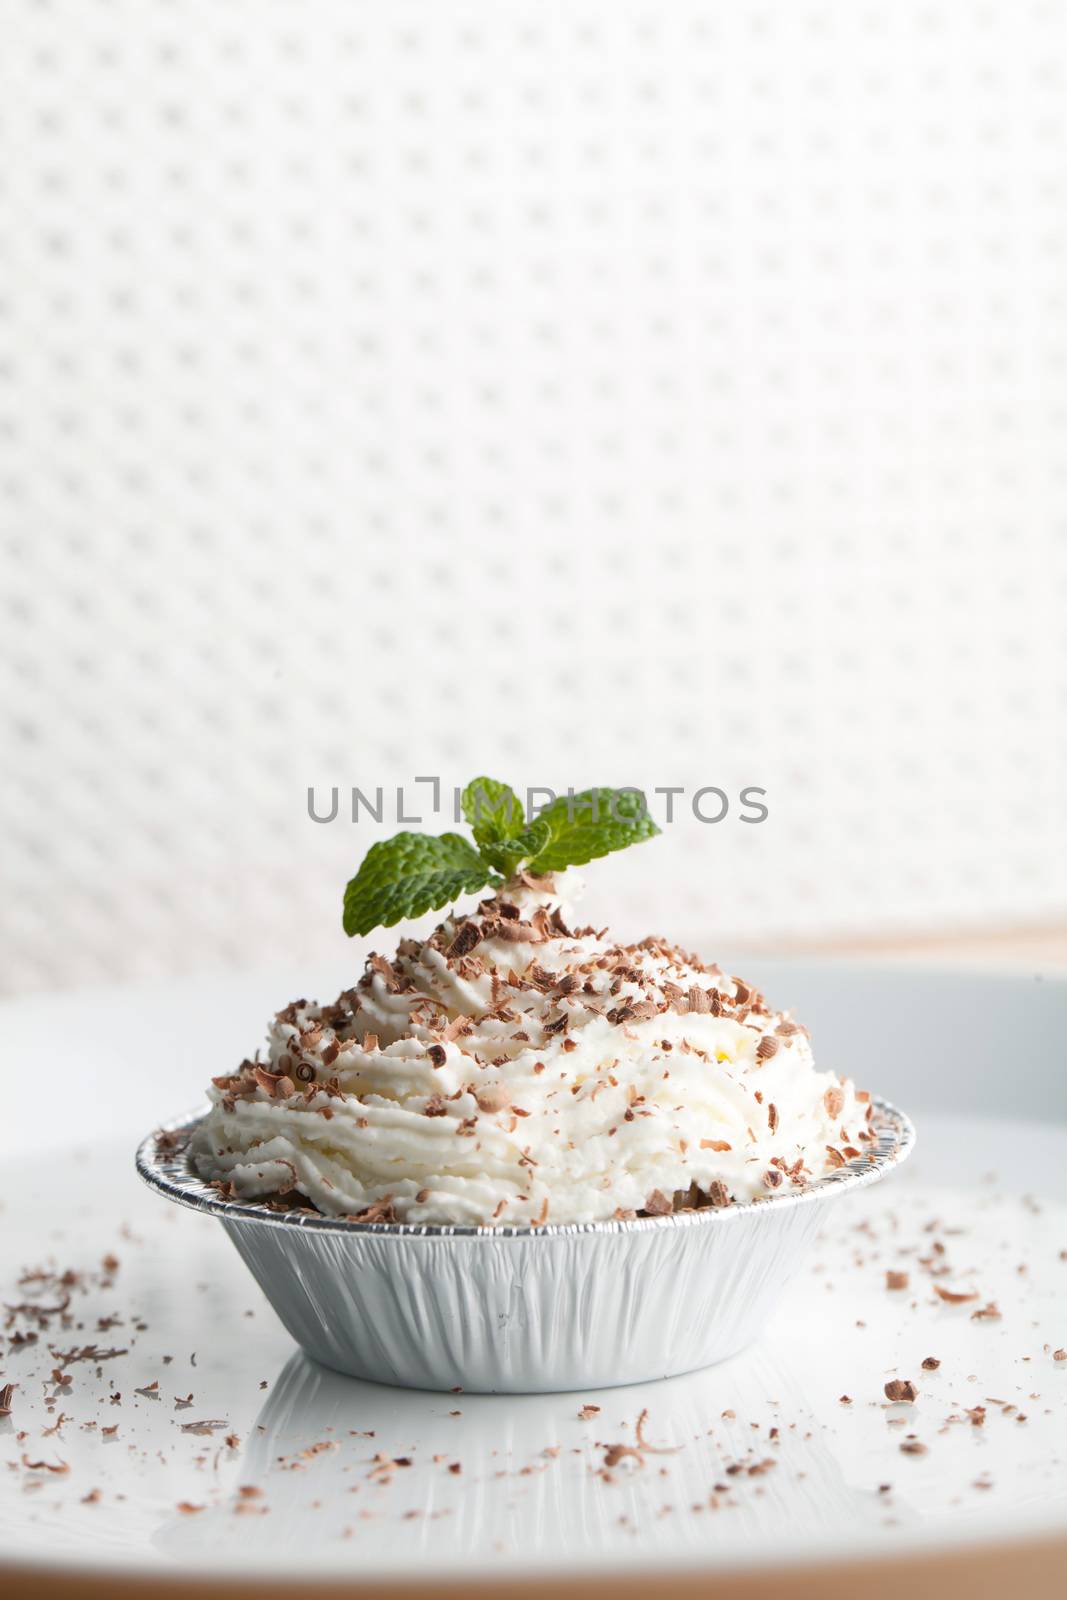 Parfait dessert with fresh whipped cream and chocolate shavings. Shallow depth of field.